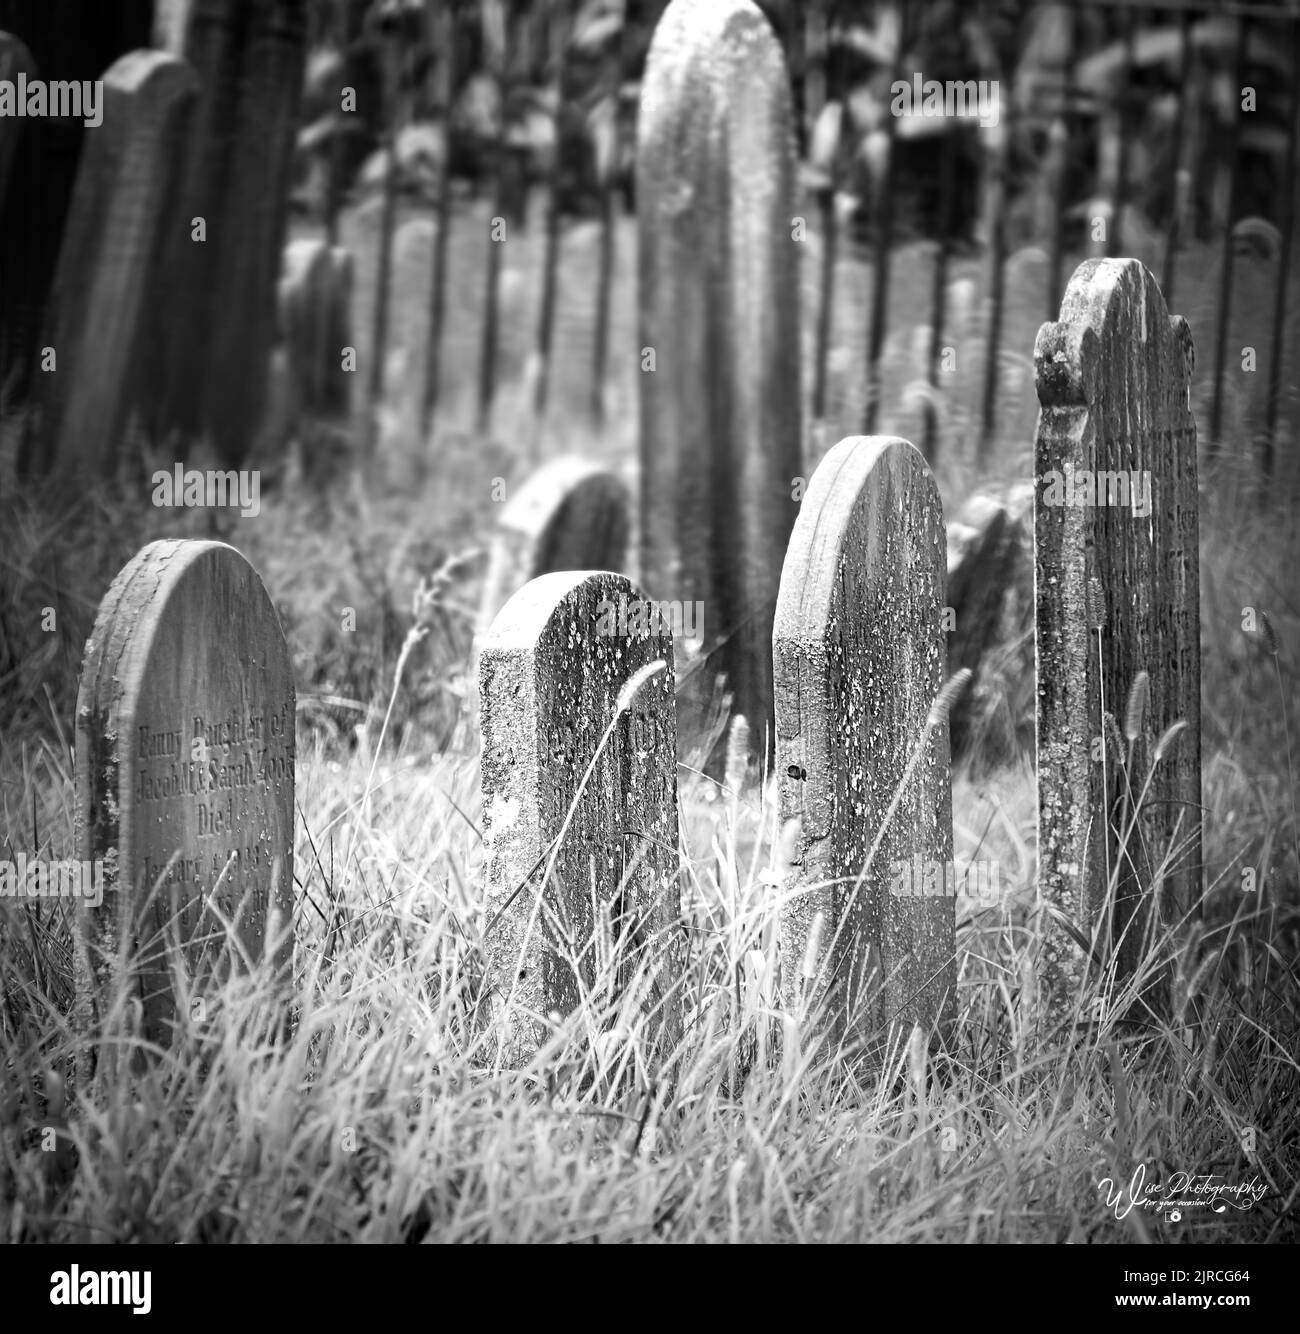 Aging tombstones in an old, lonely, forgotten graveyard with overgrown grass and cast iron fence bars in black and white during spring, summer, fall Stock Photo